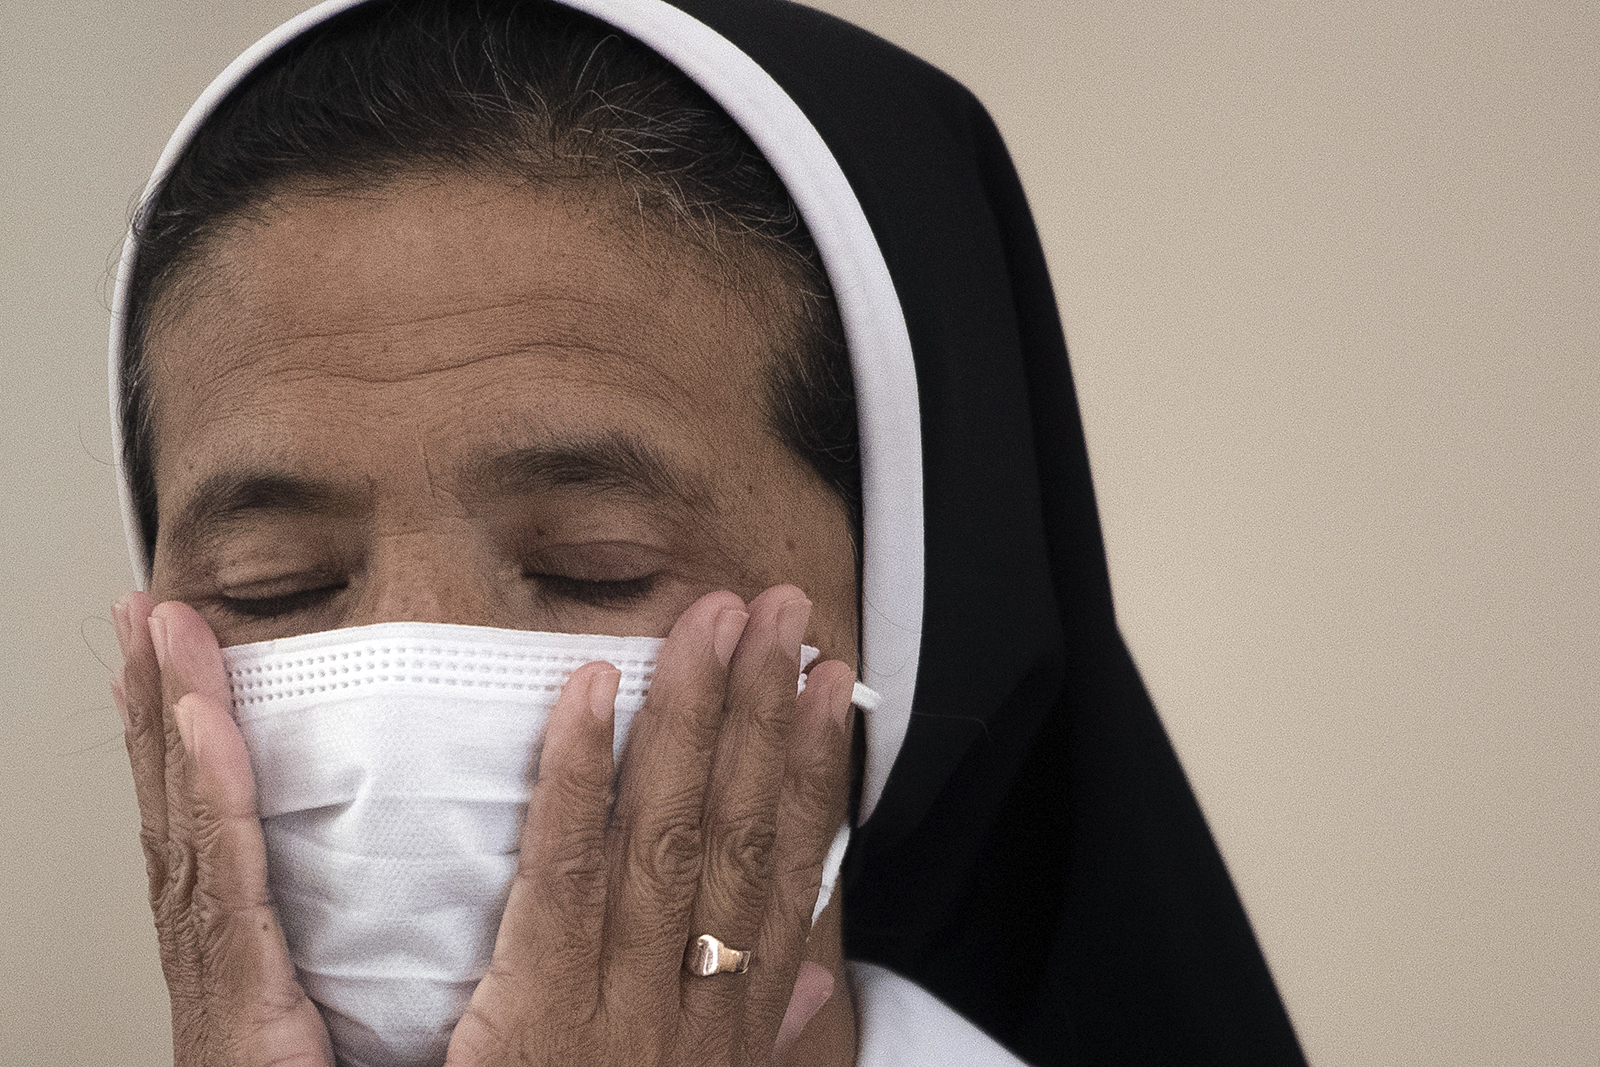 Colombian nun Gloria Cecilia Narvaez, who was held captive for nearly five years by the Mali-based Islamic insurgency, places her hands on her face during a press conference in Bogota, Colombia, Friday, Nov. 19, 2021. The nun, who was seized near the border with Burkina Faso and held since Feb. 7, 2017, was released on Oct. 9, 2021. (AP Photo/Ivan Valencia)